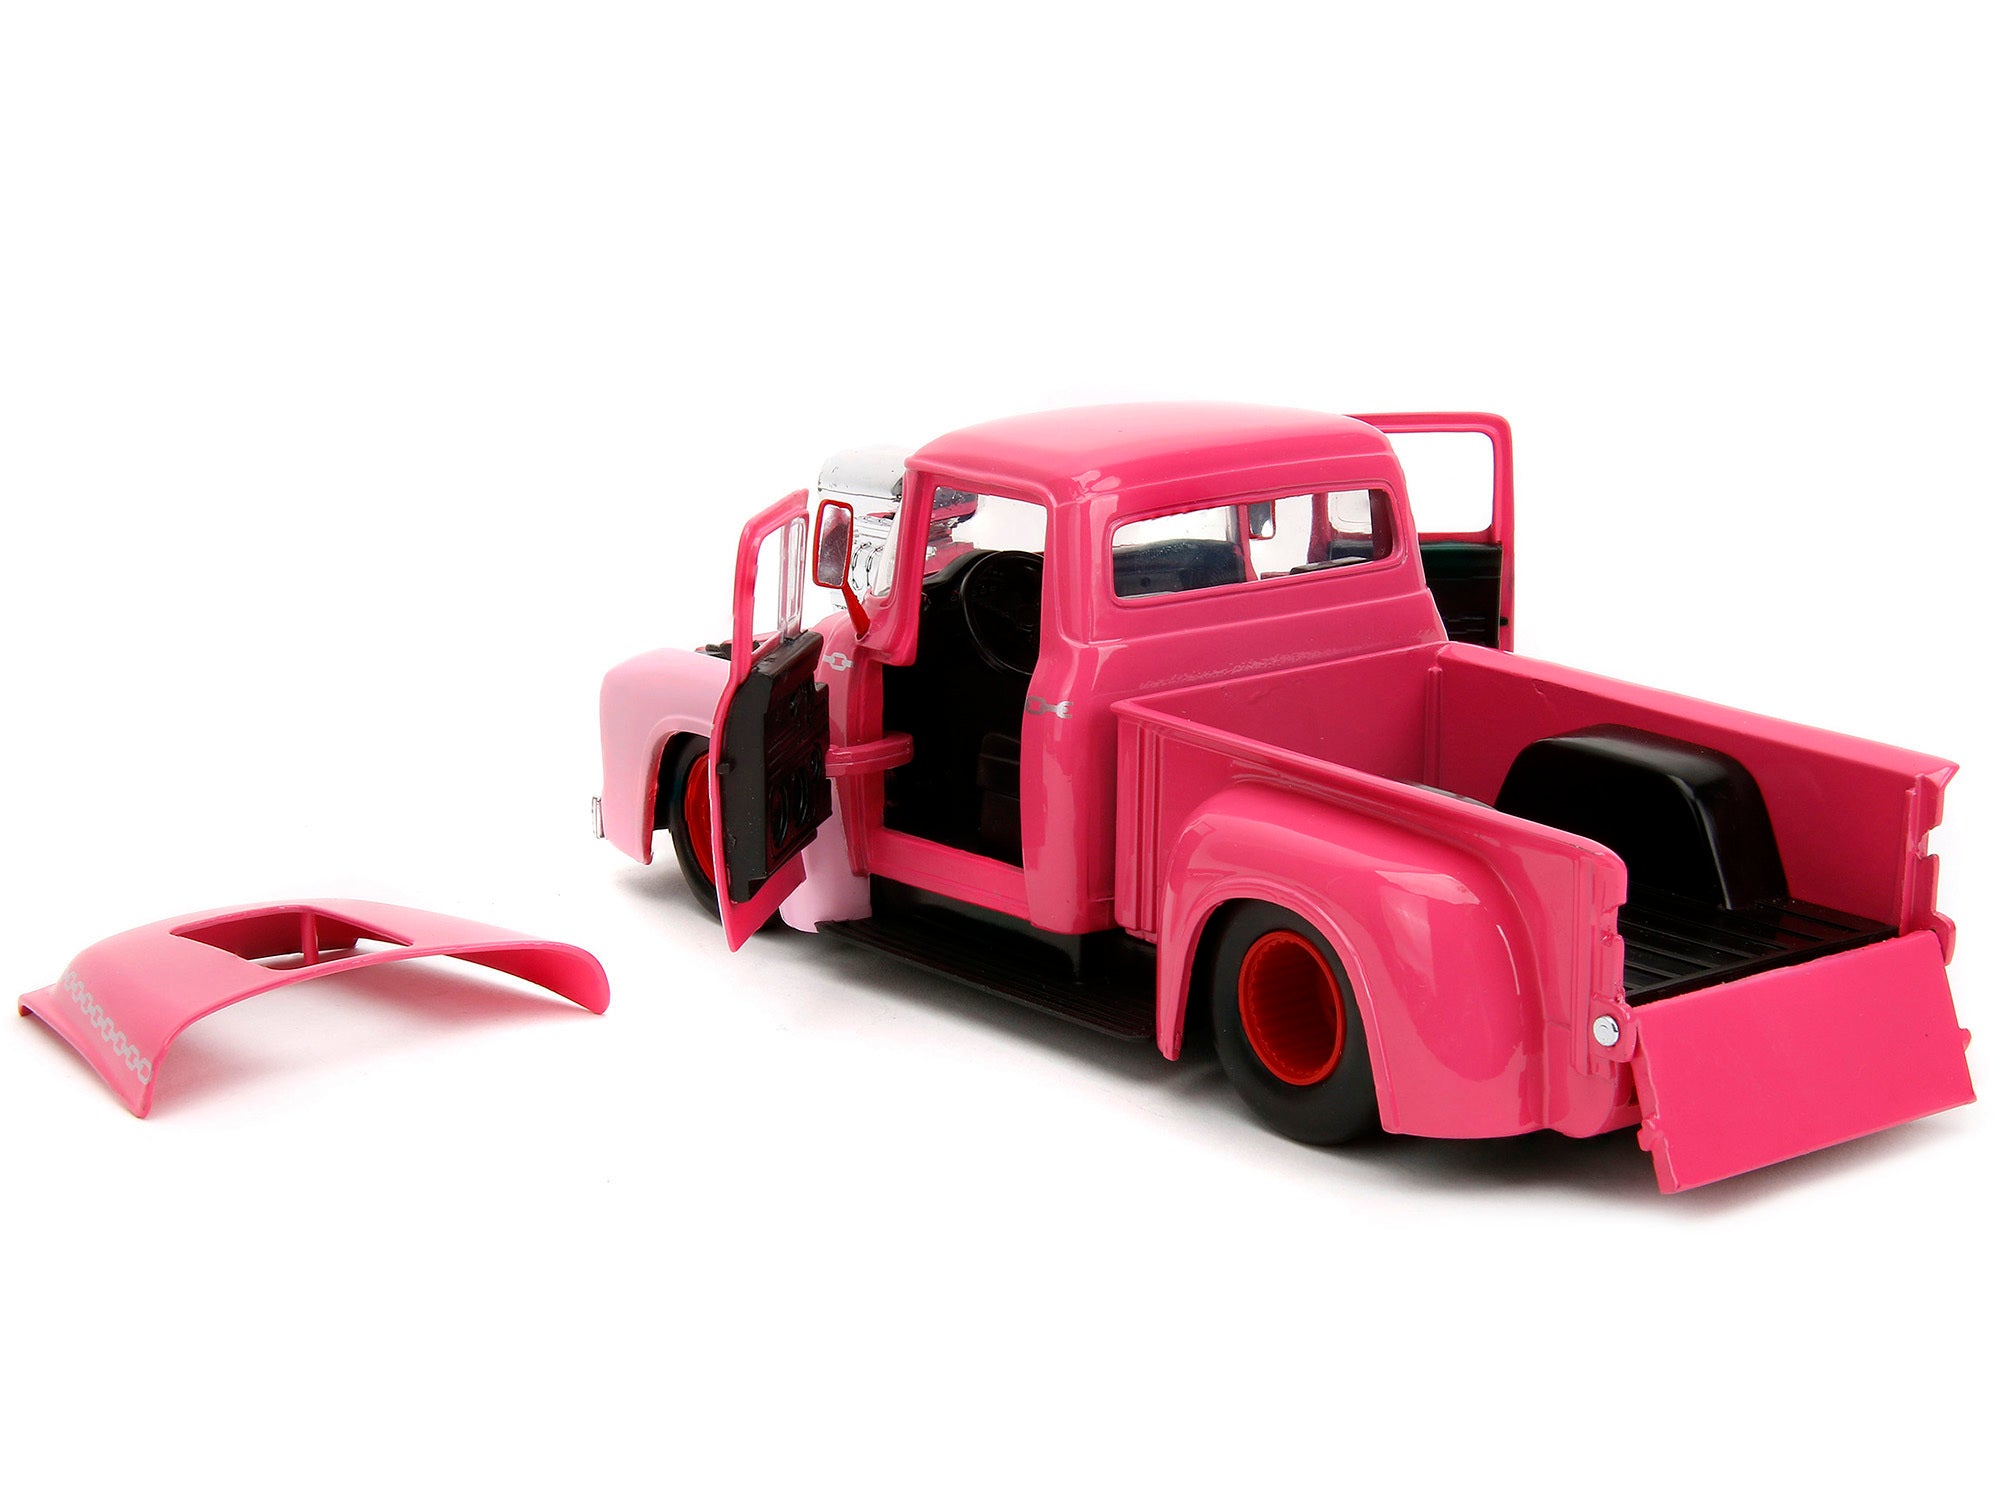 1956 Ford F-100 Pickup Truck Pink with Graphics and Franken Berry Diecast Figure "Franken Berry" "Hollywood Rides" Series 1/24 Diecast Model Car by Jada